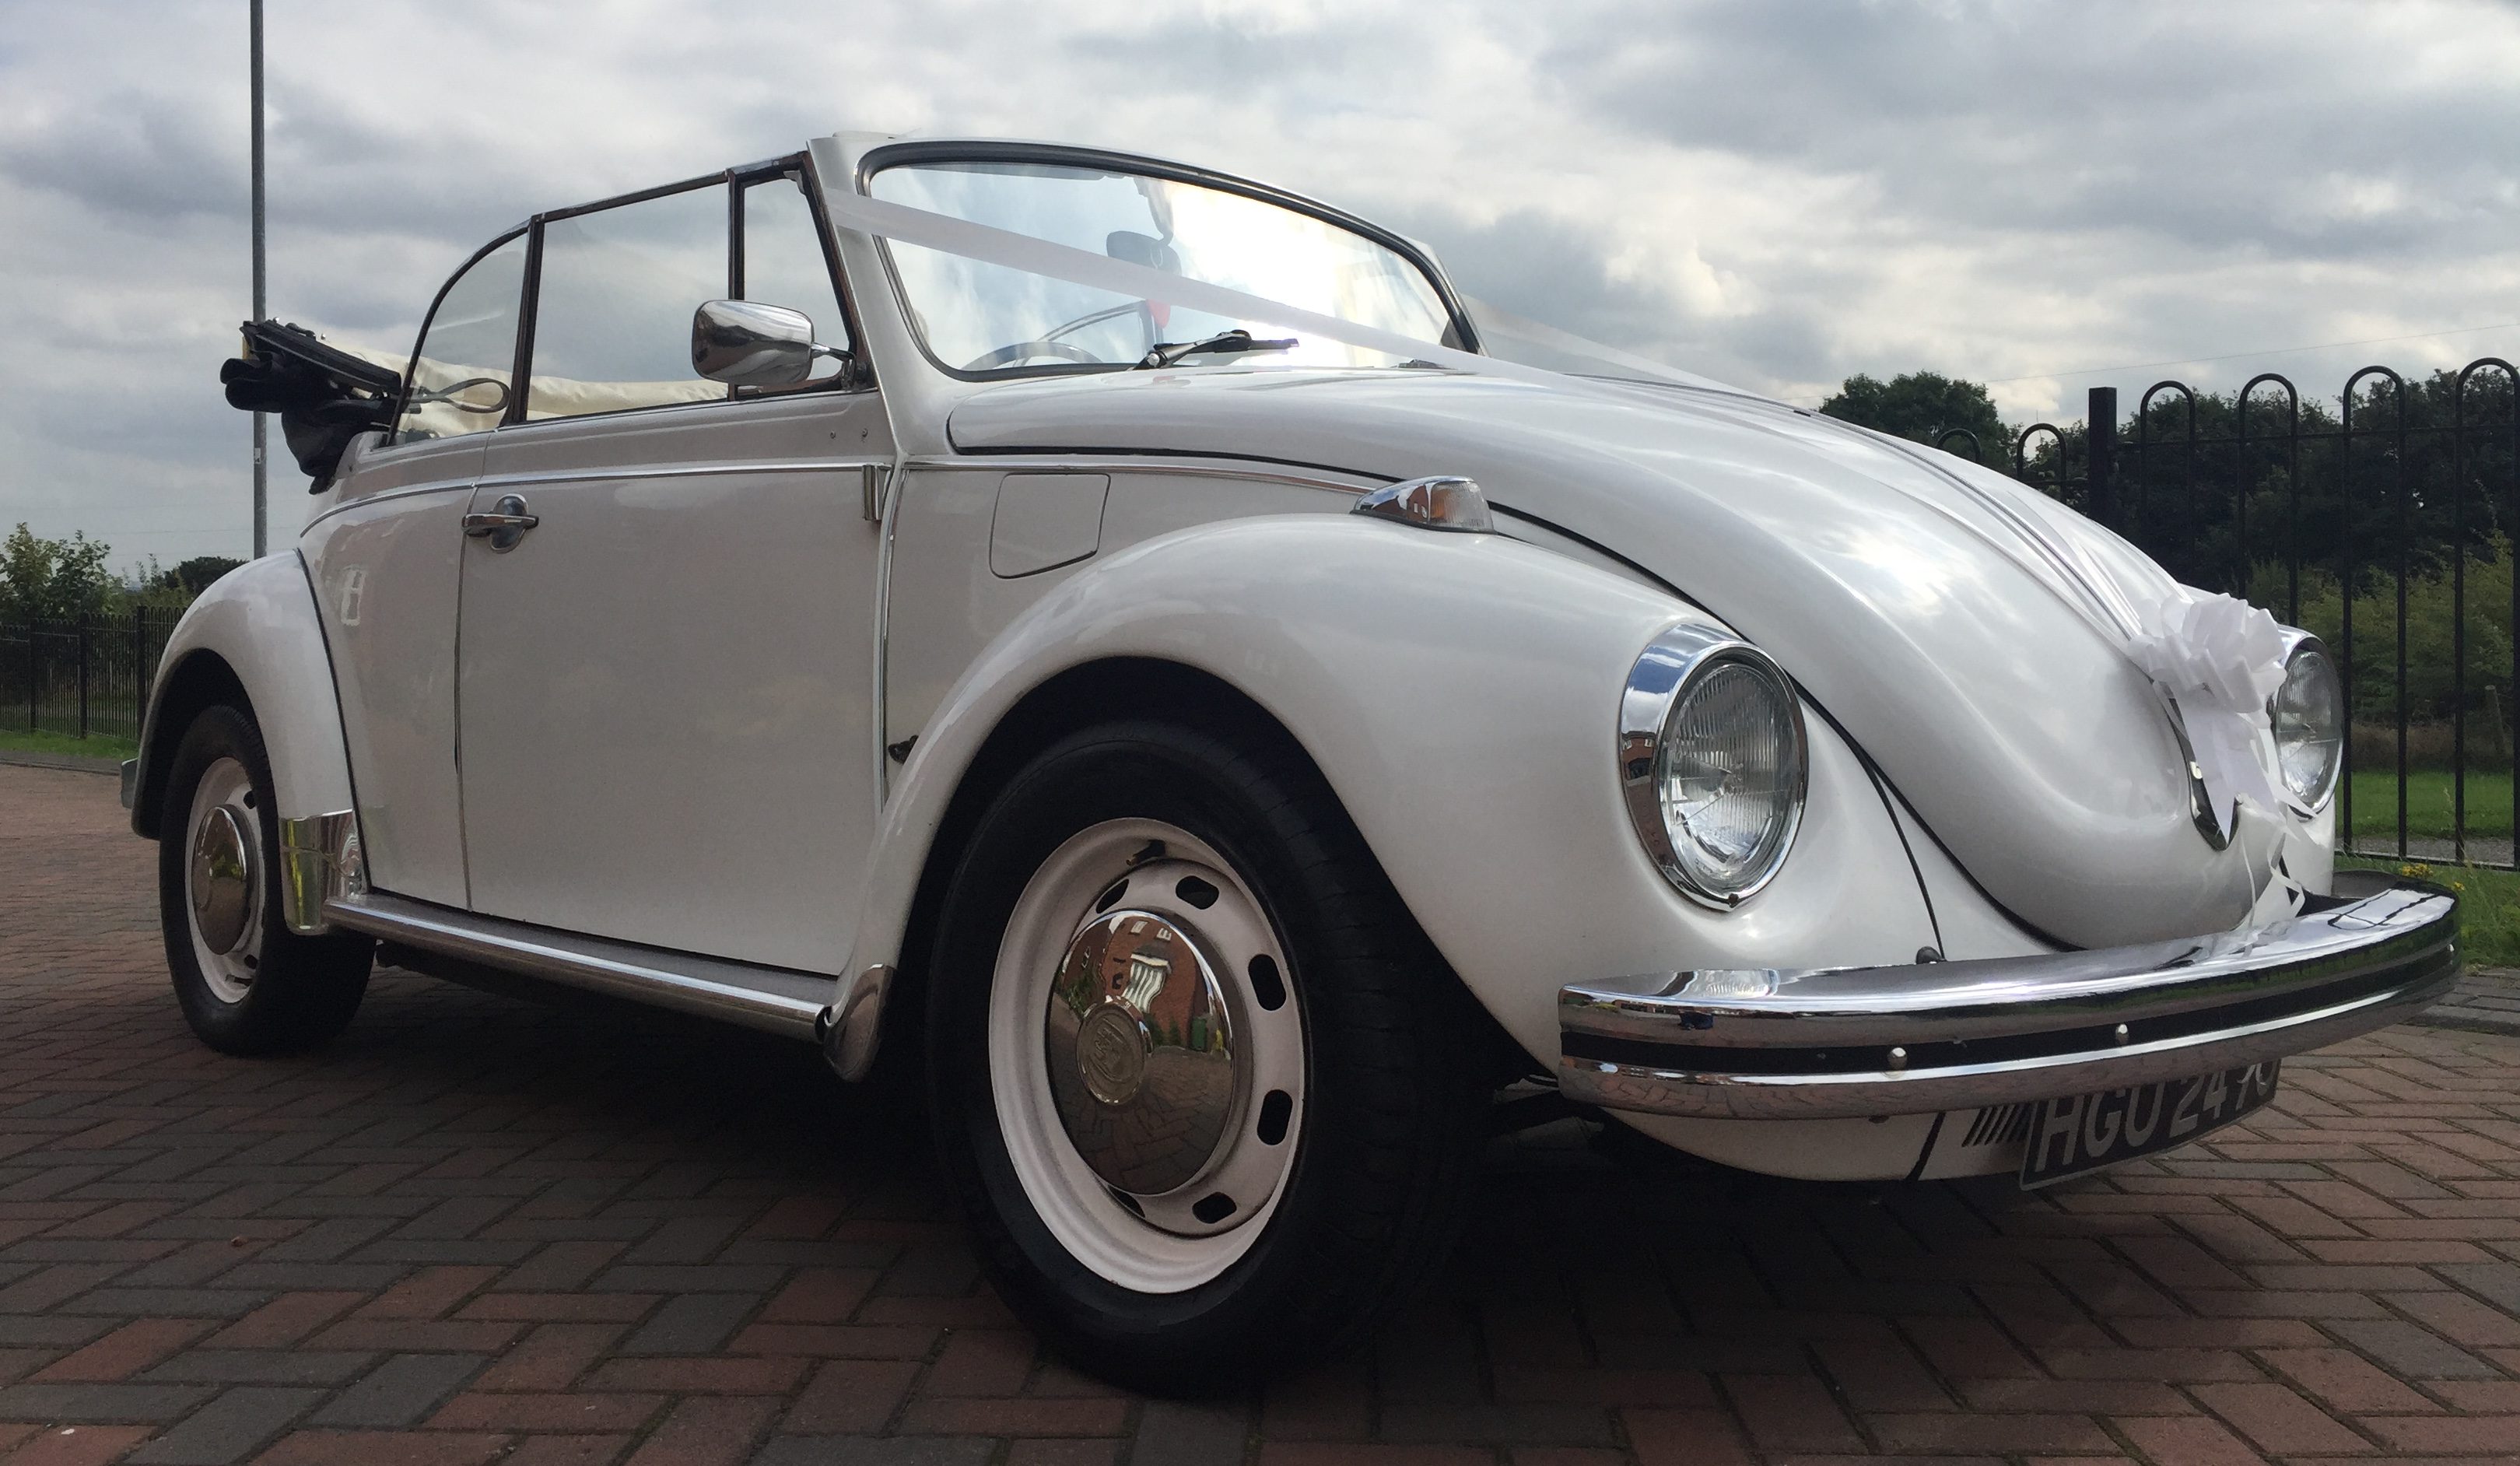 1970 White Cabriolet Vintage Beetle - Front Right -Top Down